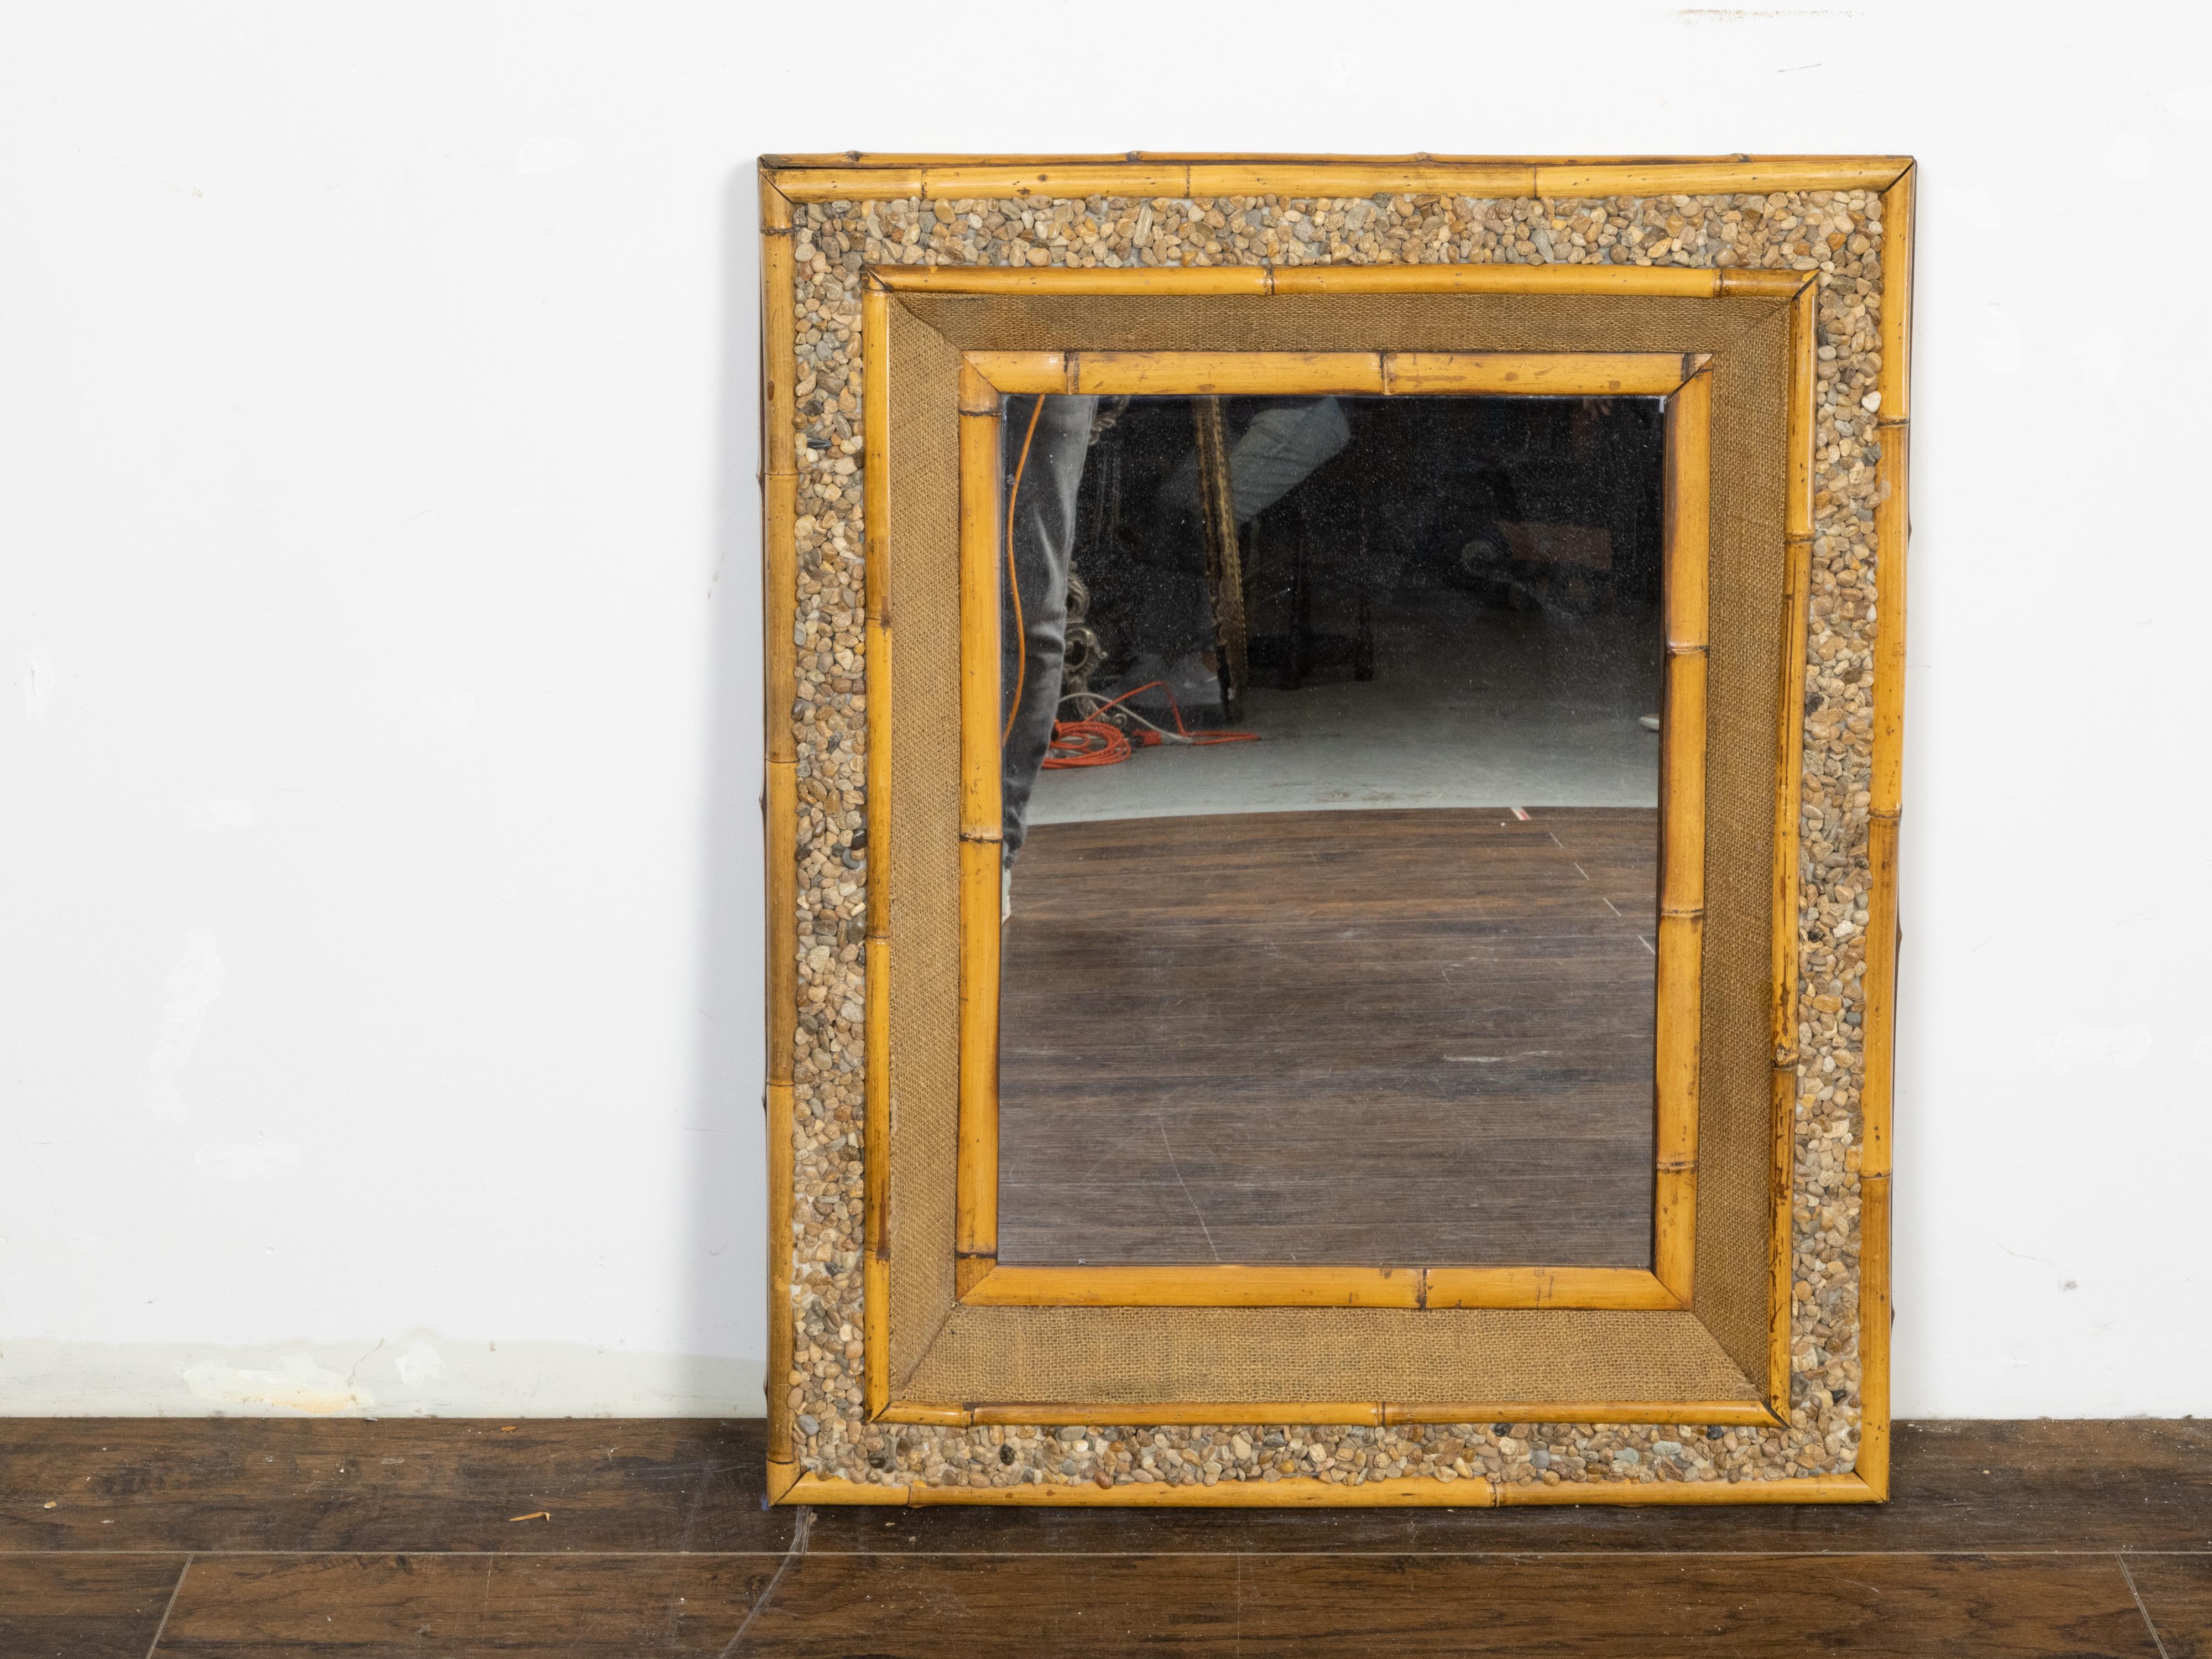 An English vintage rectangular bamboo mirror from the mid-20th century, with rock and burlap décor. Created in England during the Midcentury period, this unusual mirror attracts the attention with its rectangular frame alternating bamboo, rocks and